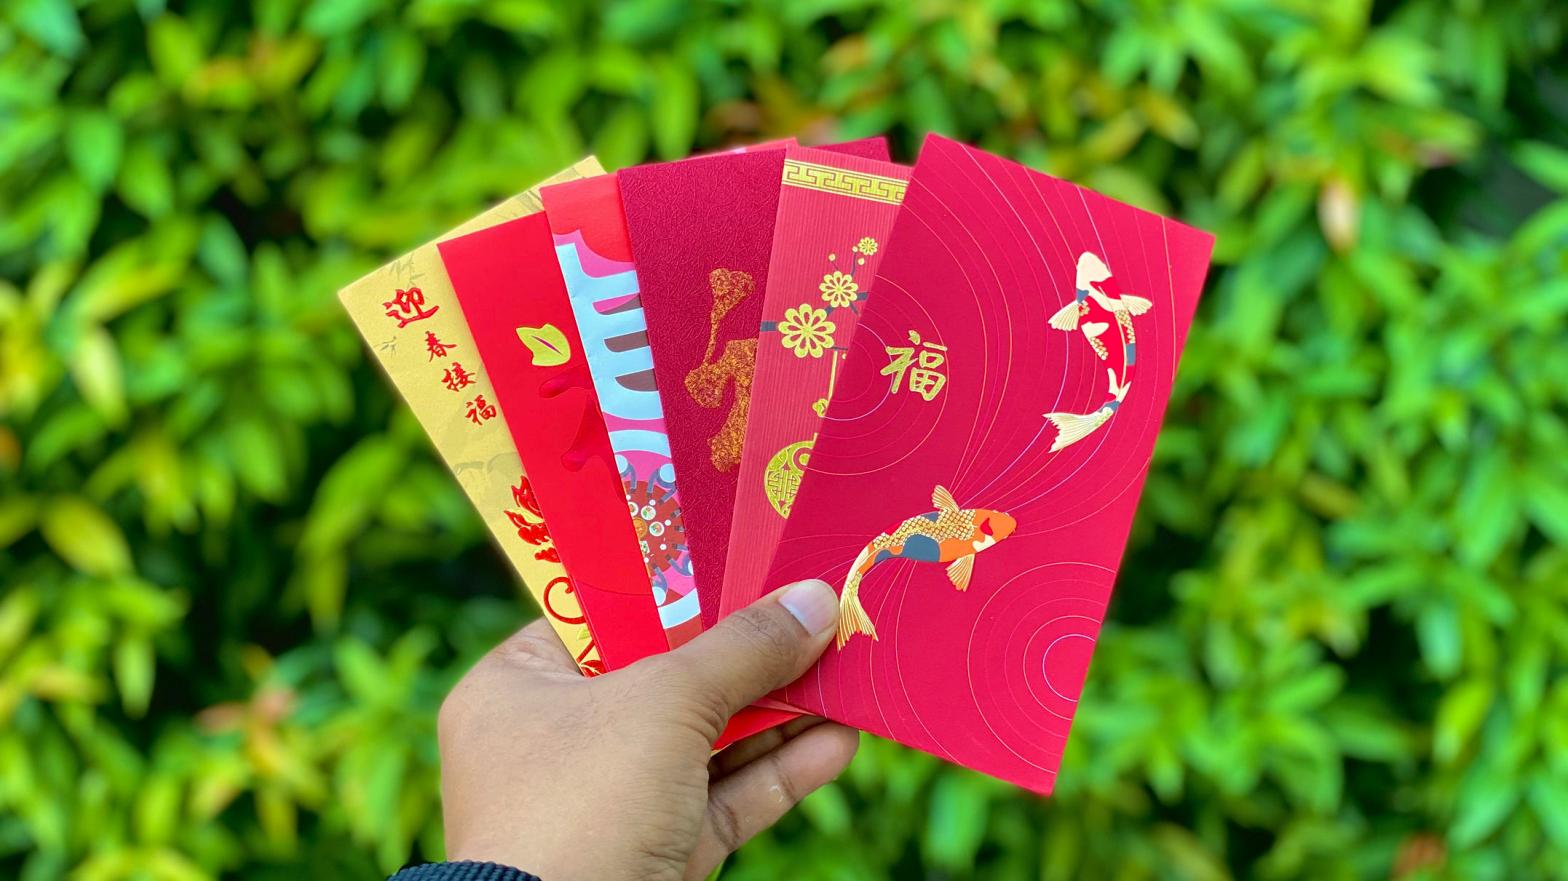 Red envelopes are a traditional gift during Lunar New Year